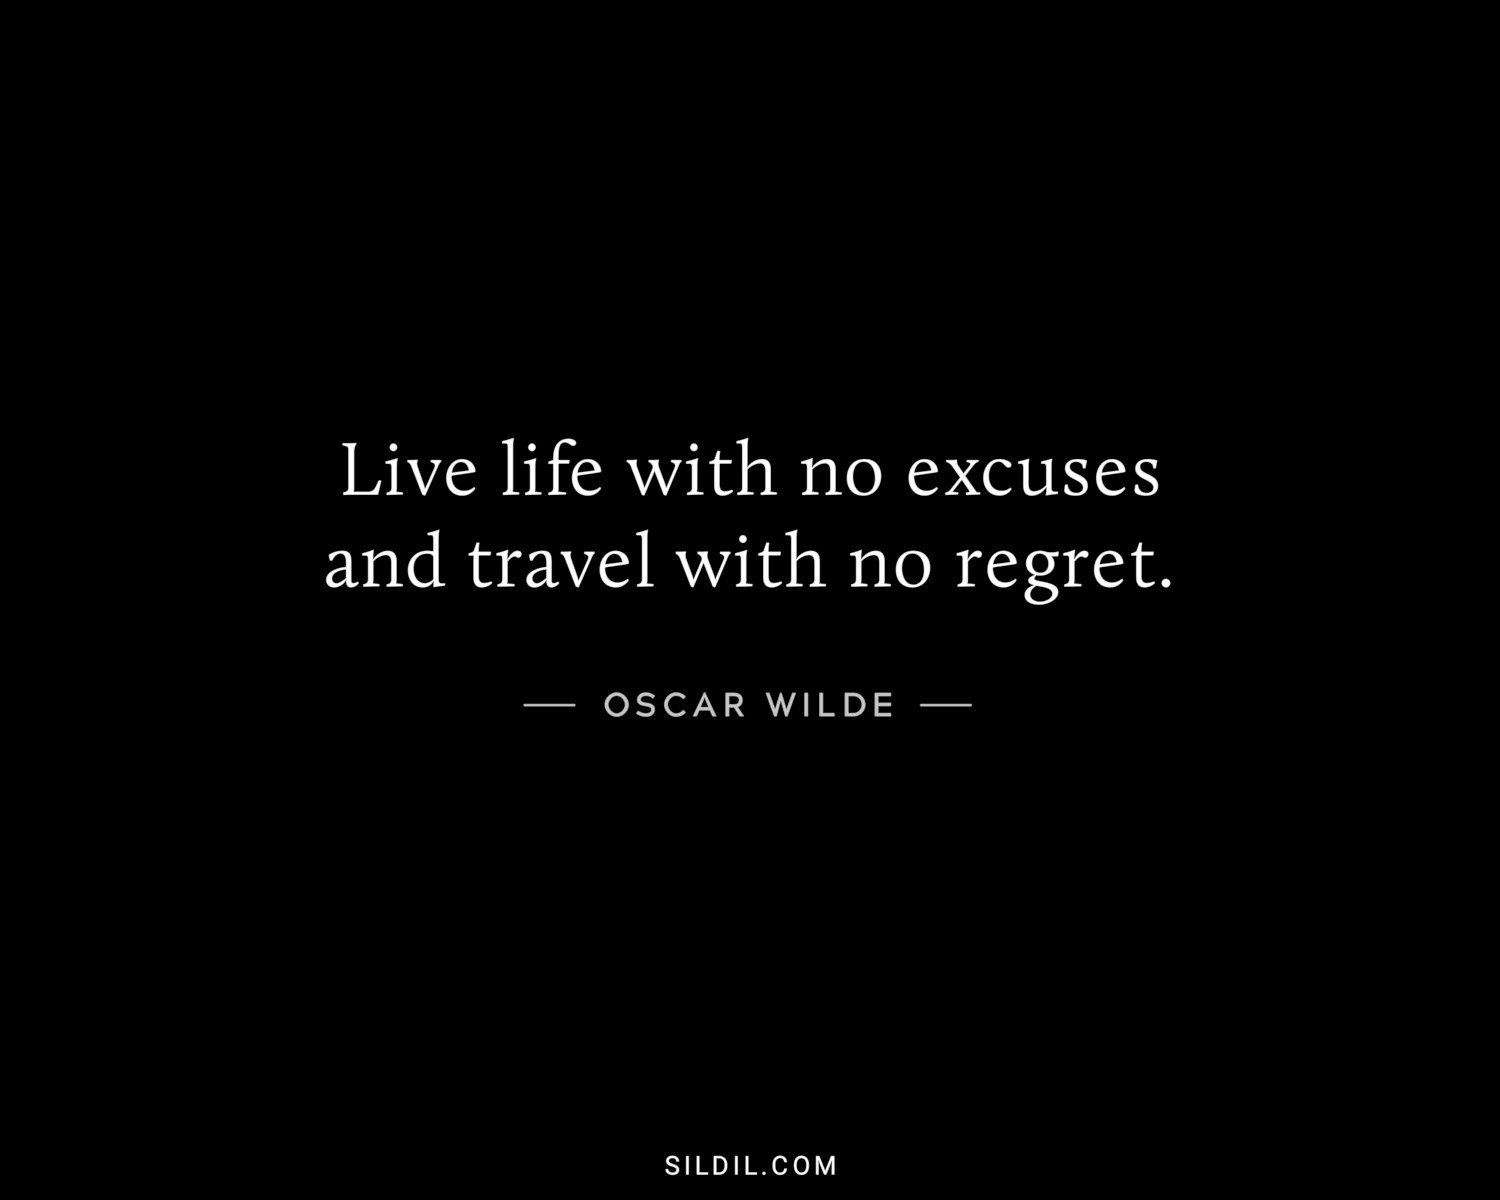 Live life with no excuses and travel with no regret.